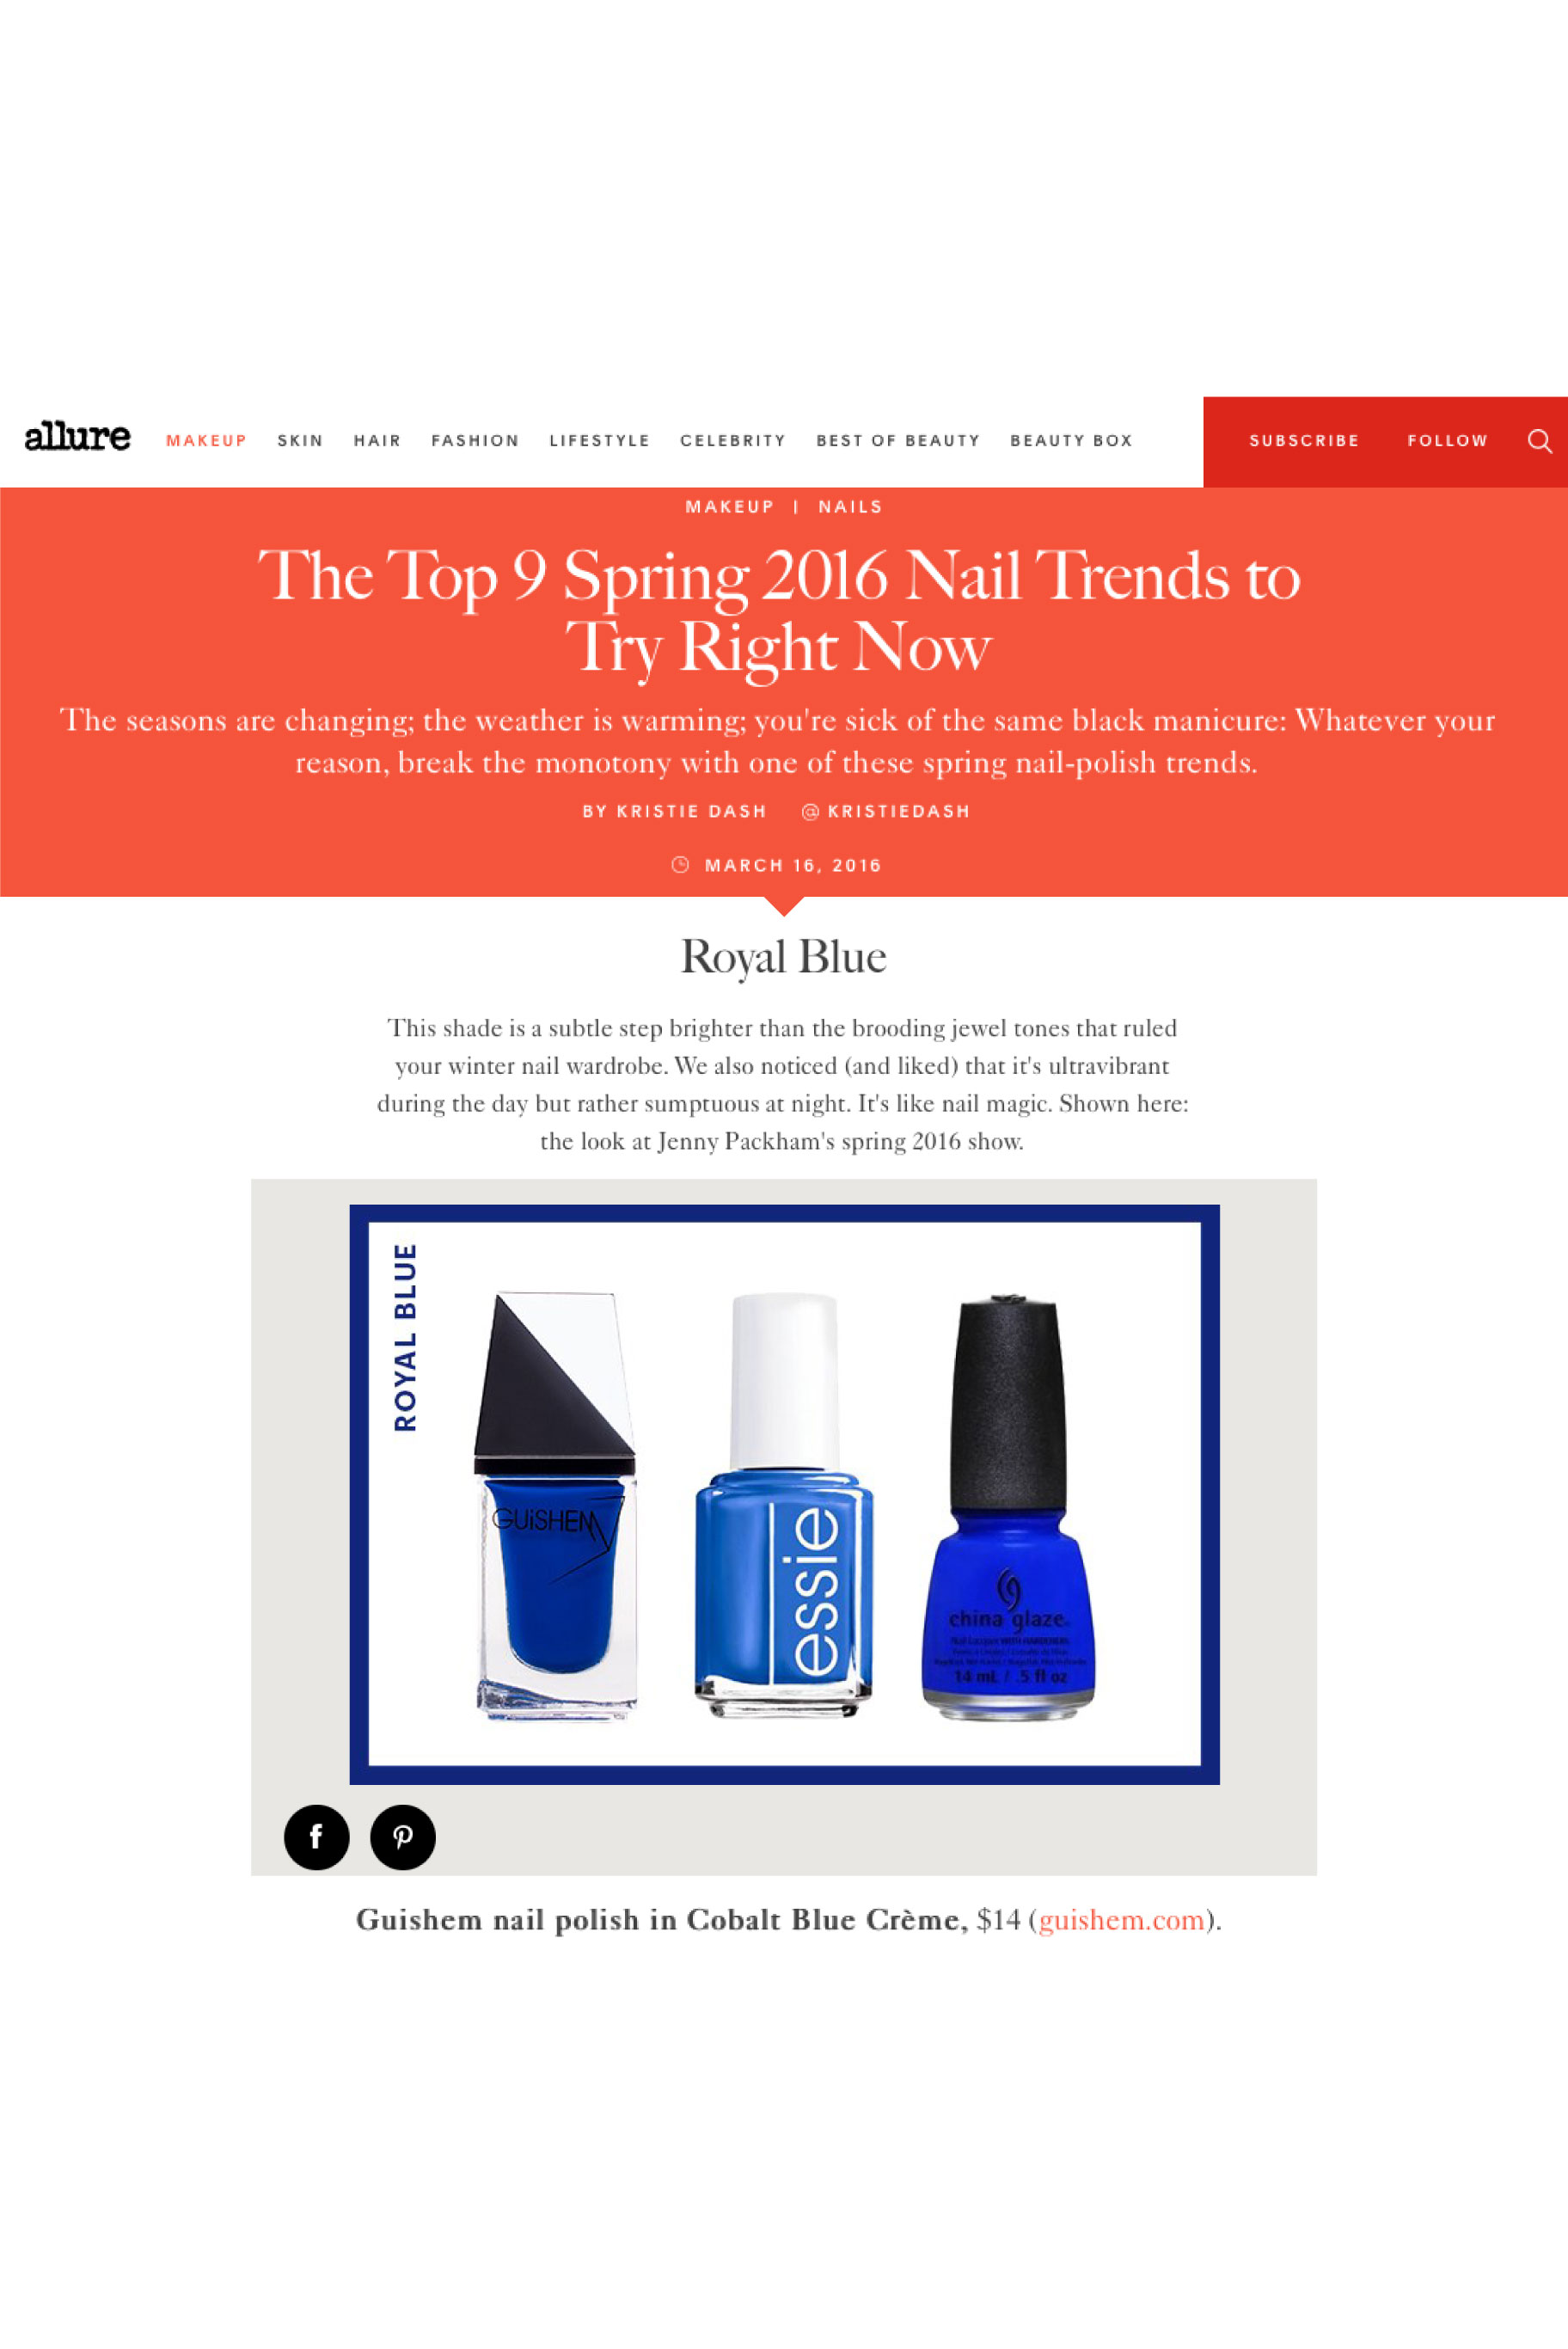 GUiSHEM featured in Allure: The Top 9 Spring 2016 Nail Trends to Try Right Now by Kristie Dash